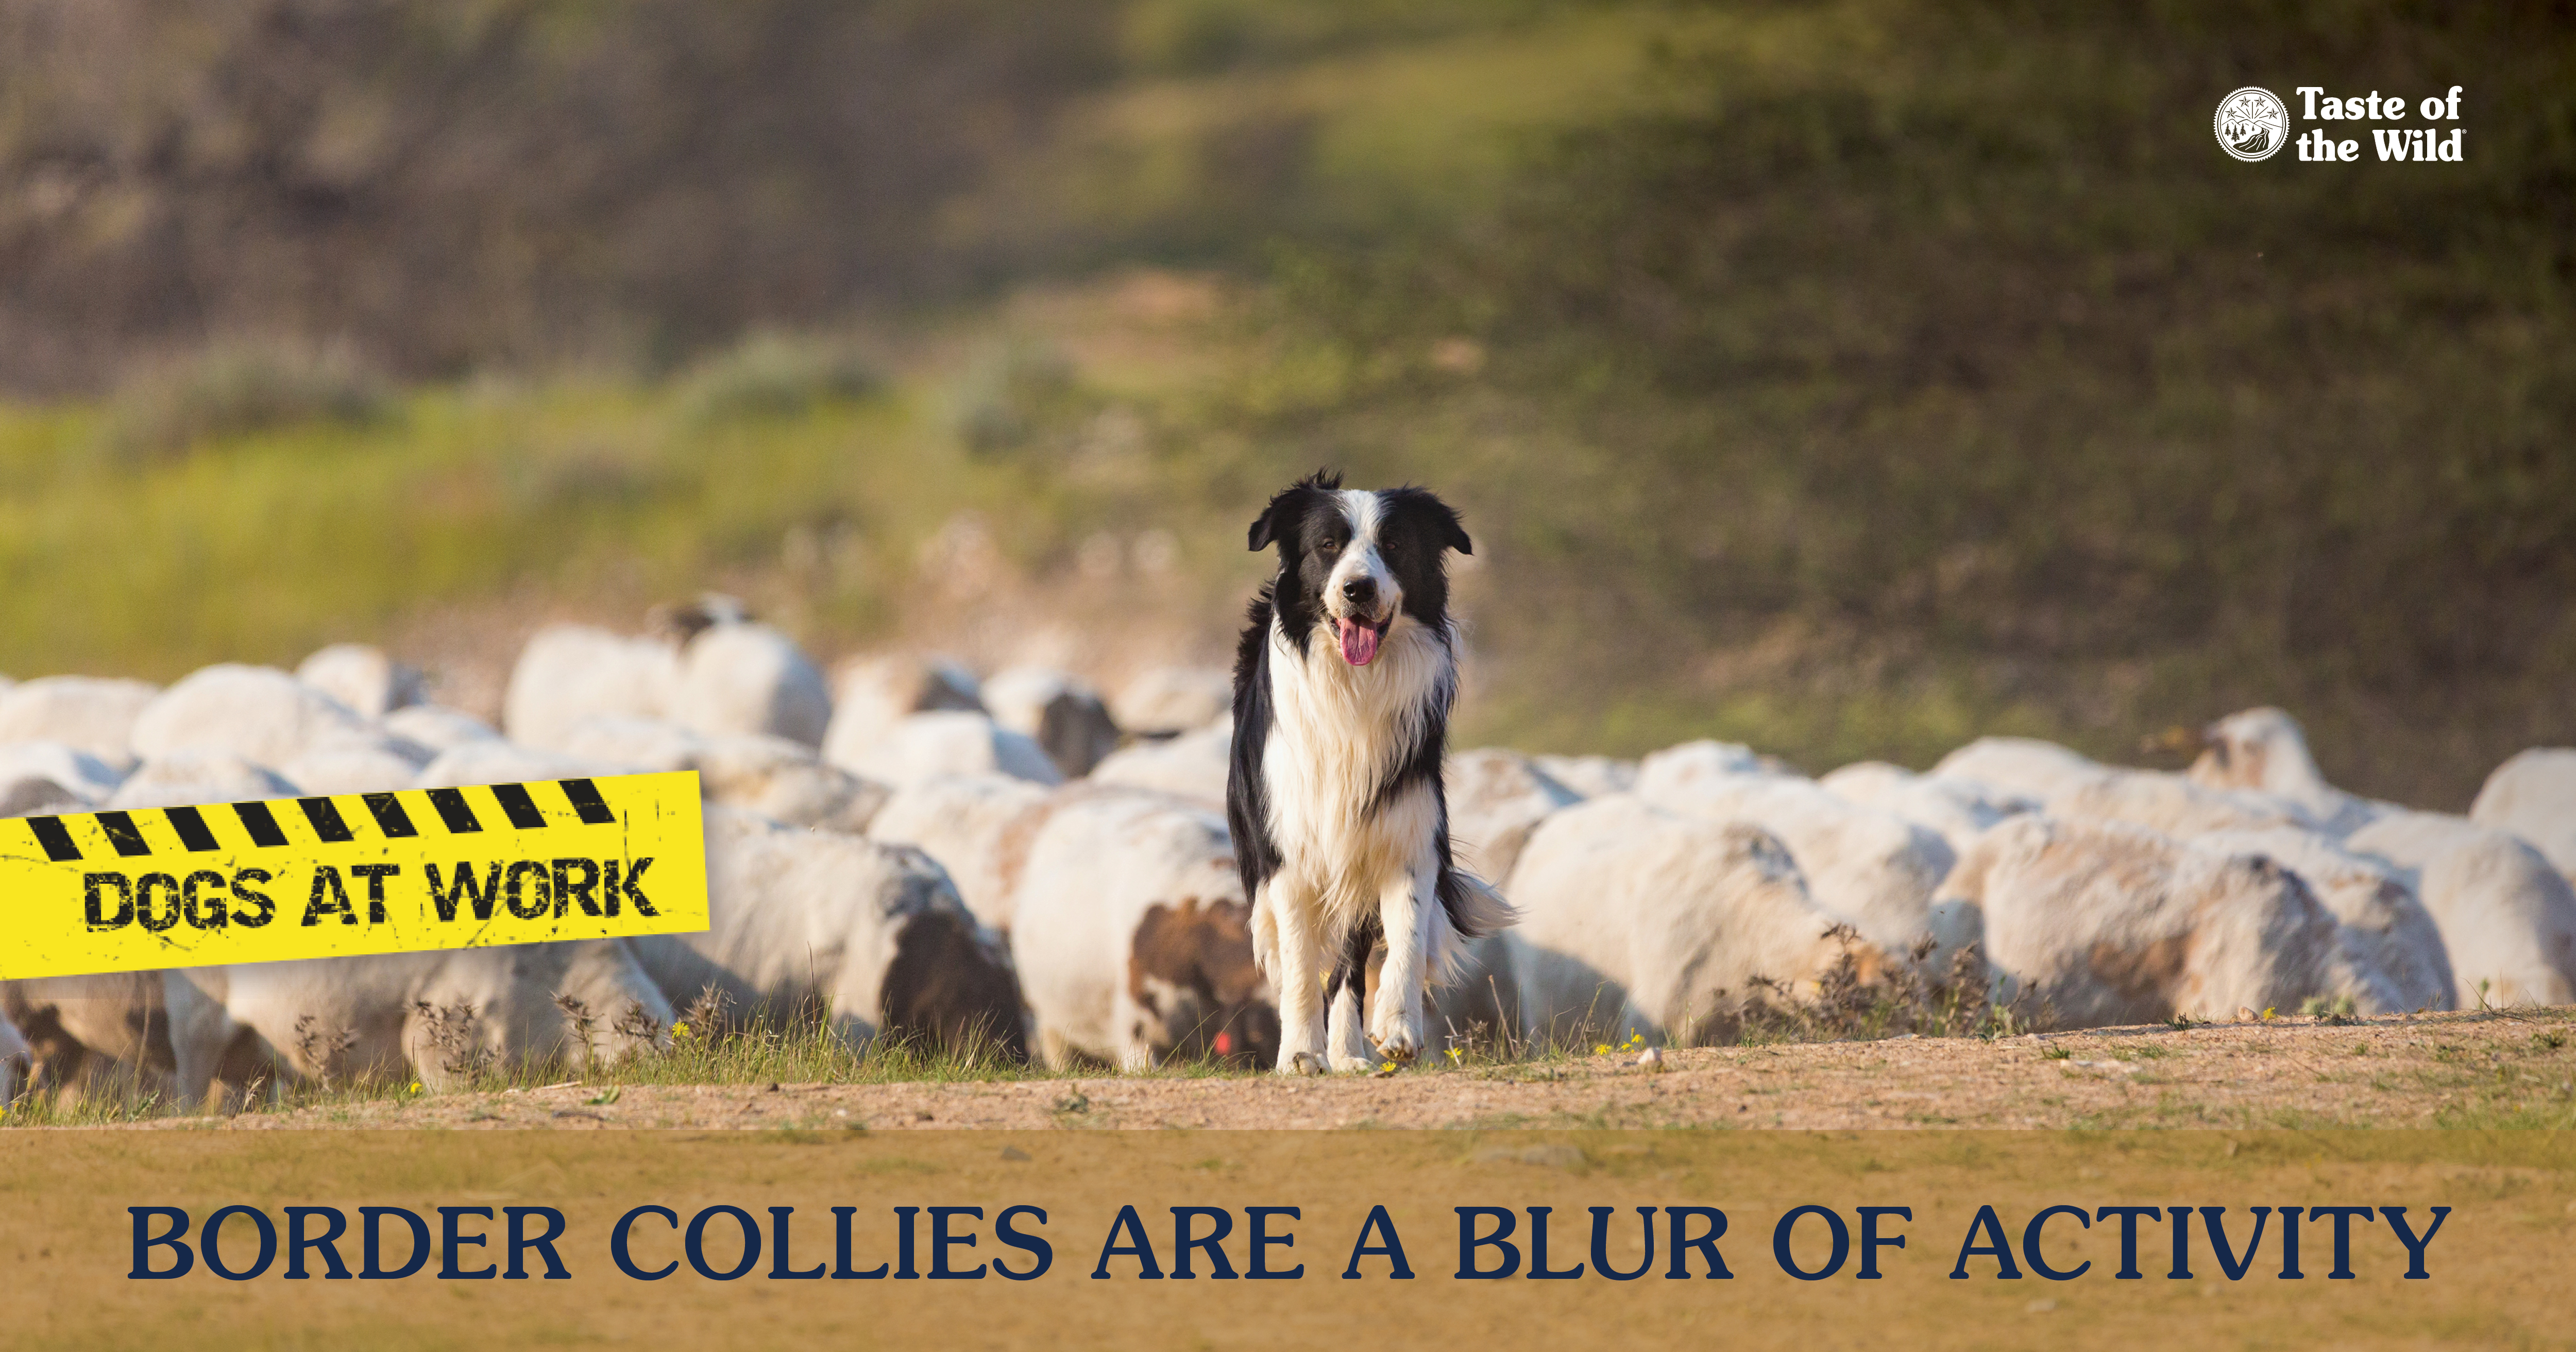 A border collie standing out in a field leading a herd of sheep.